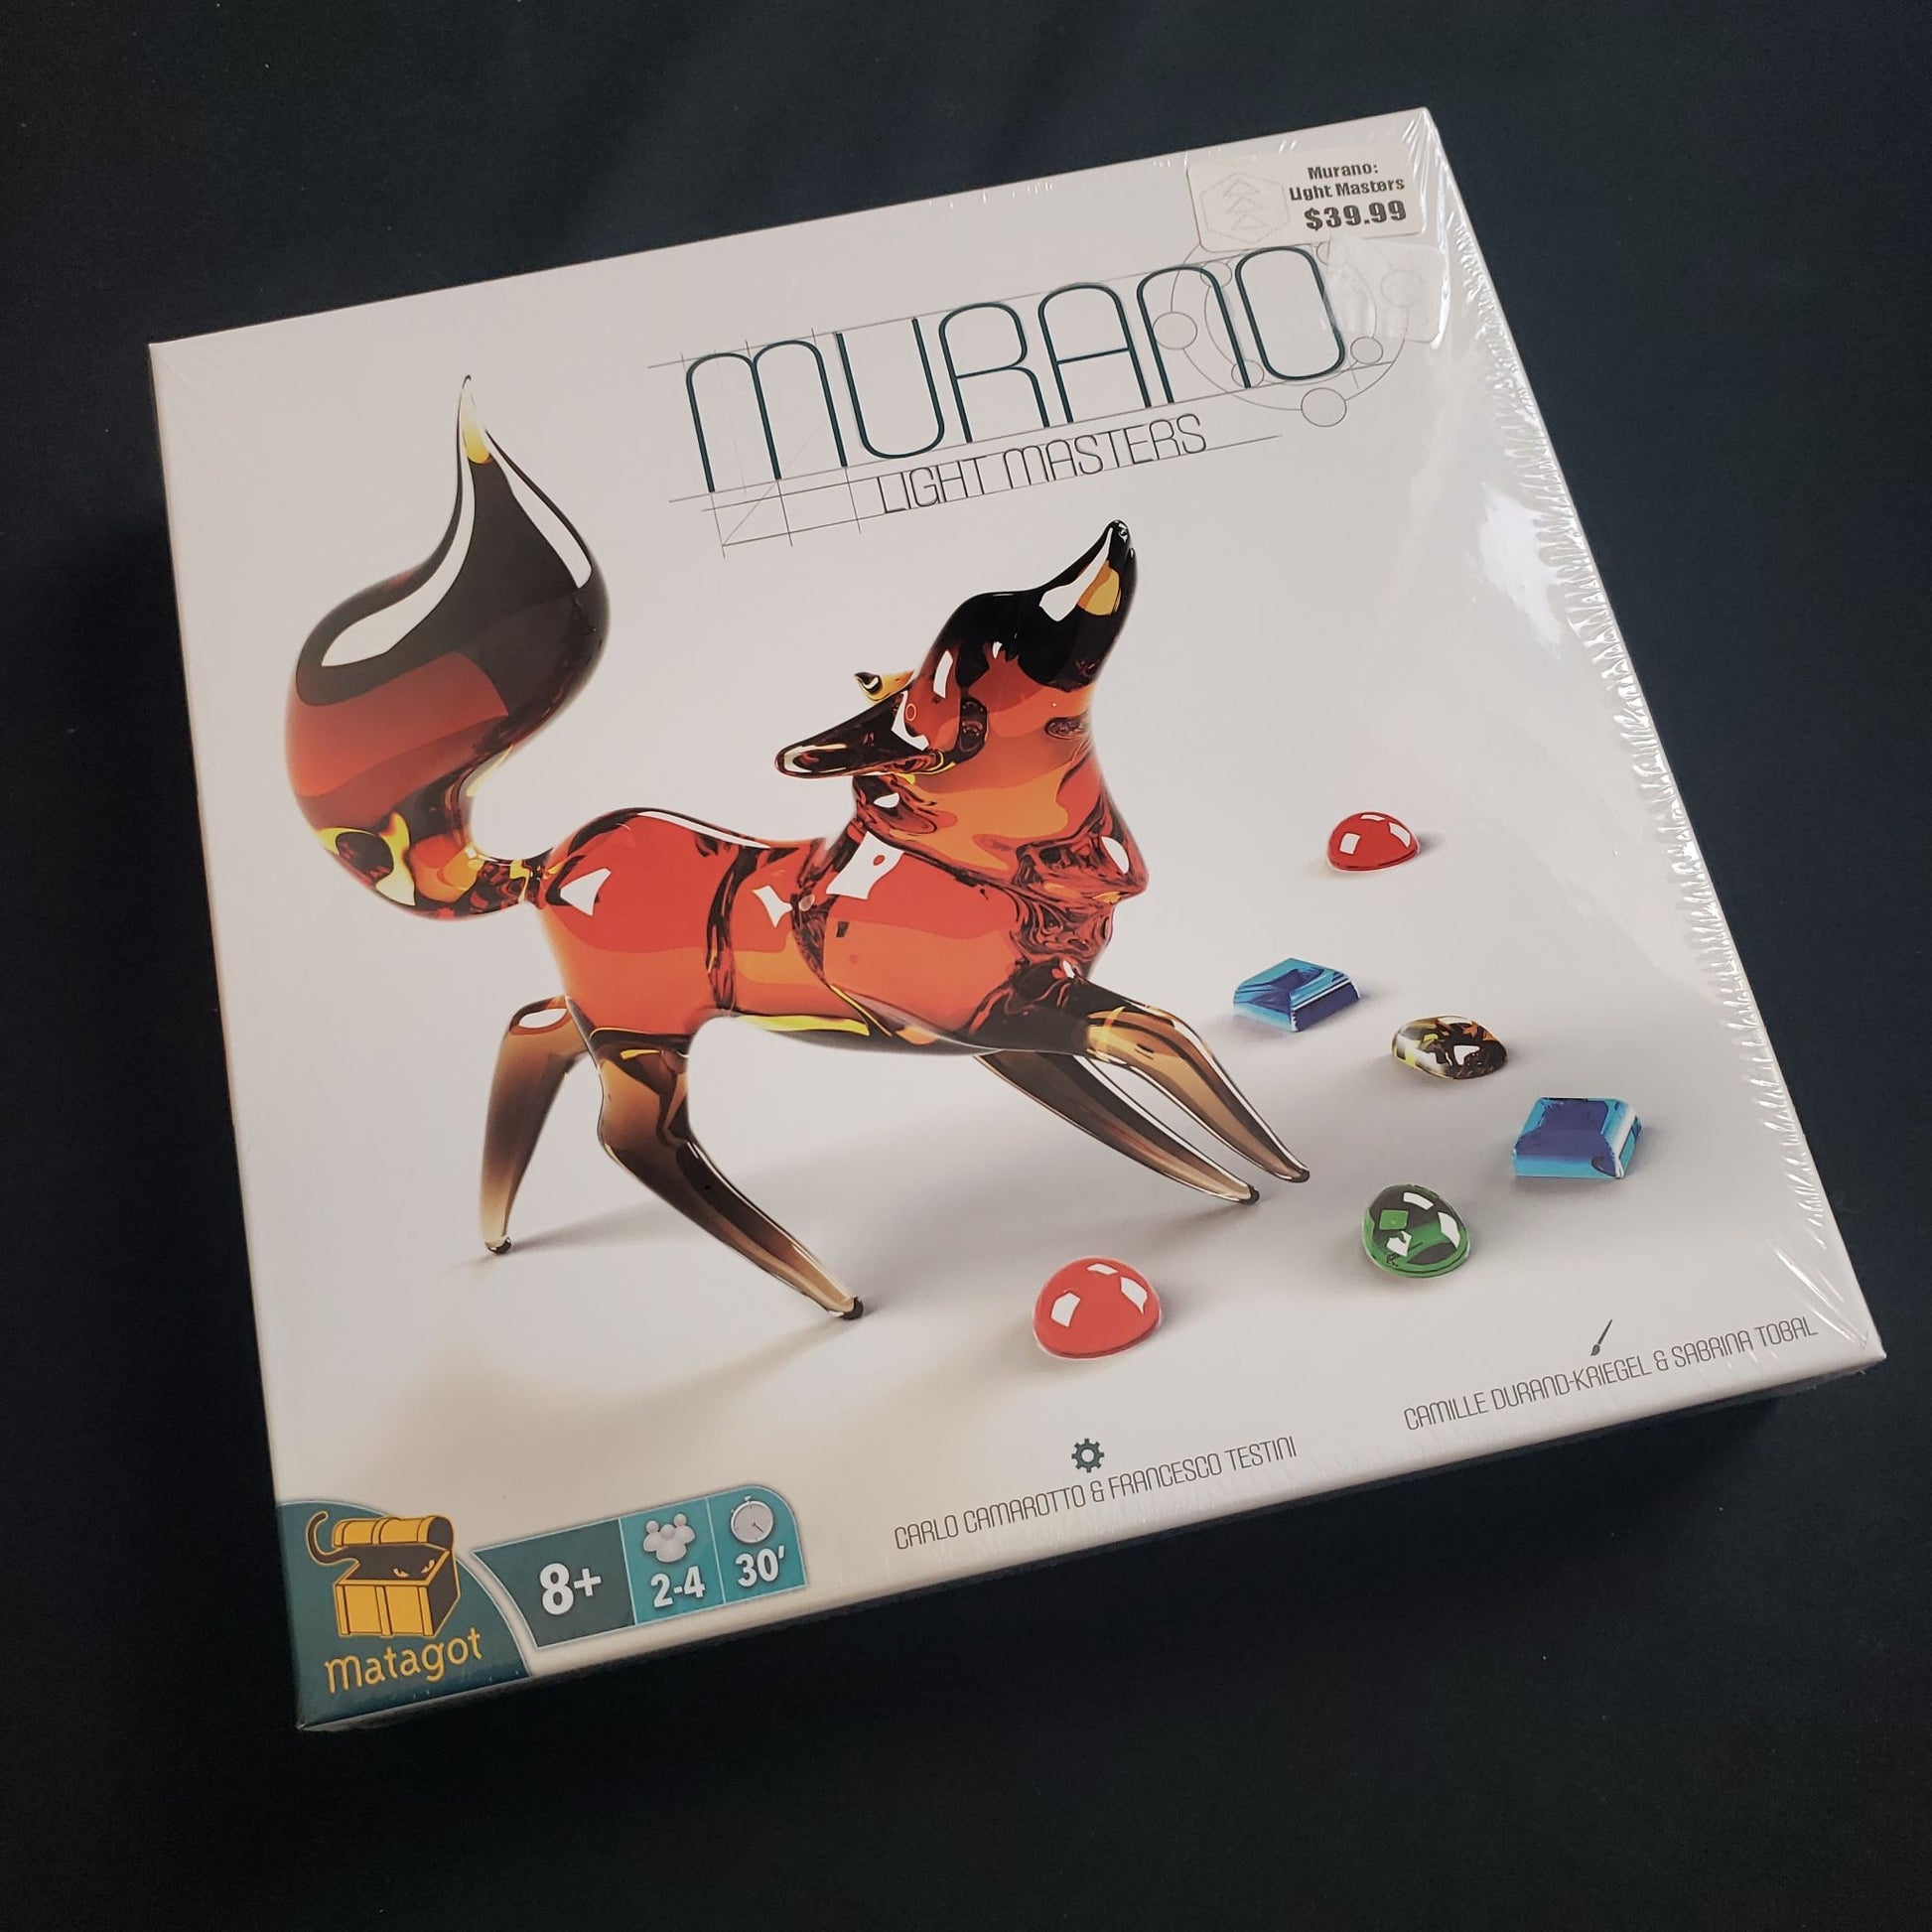 Murano: Light Masters board game - front cover of box